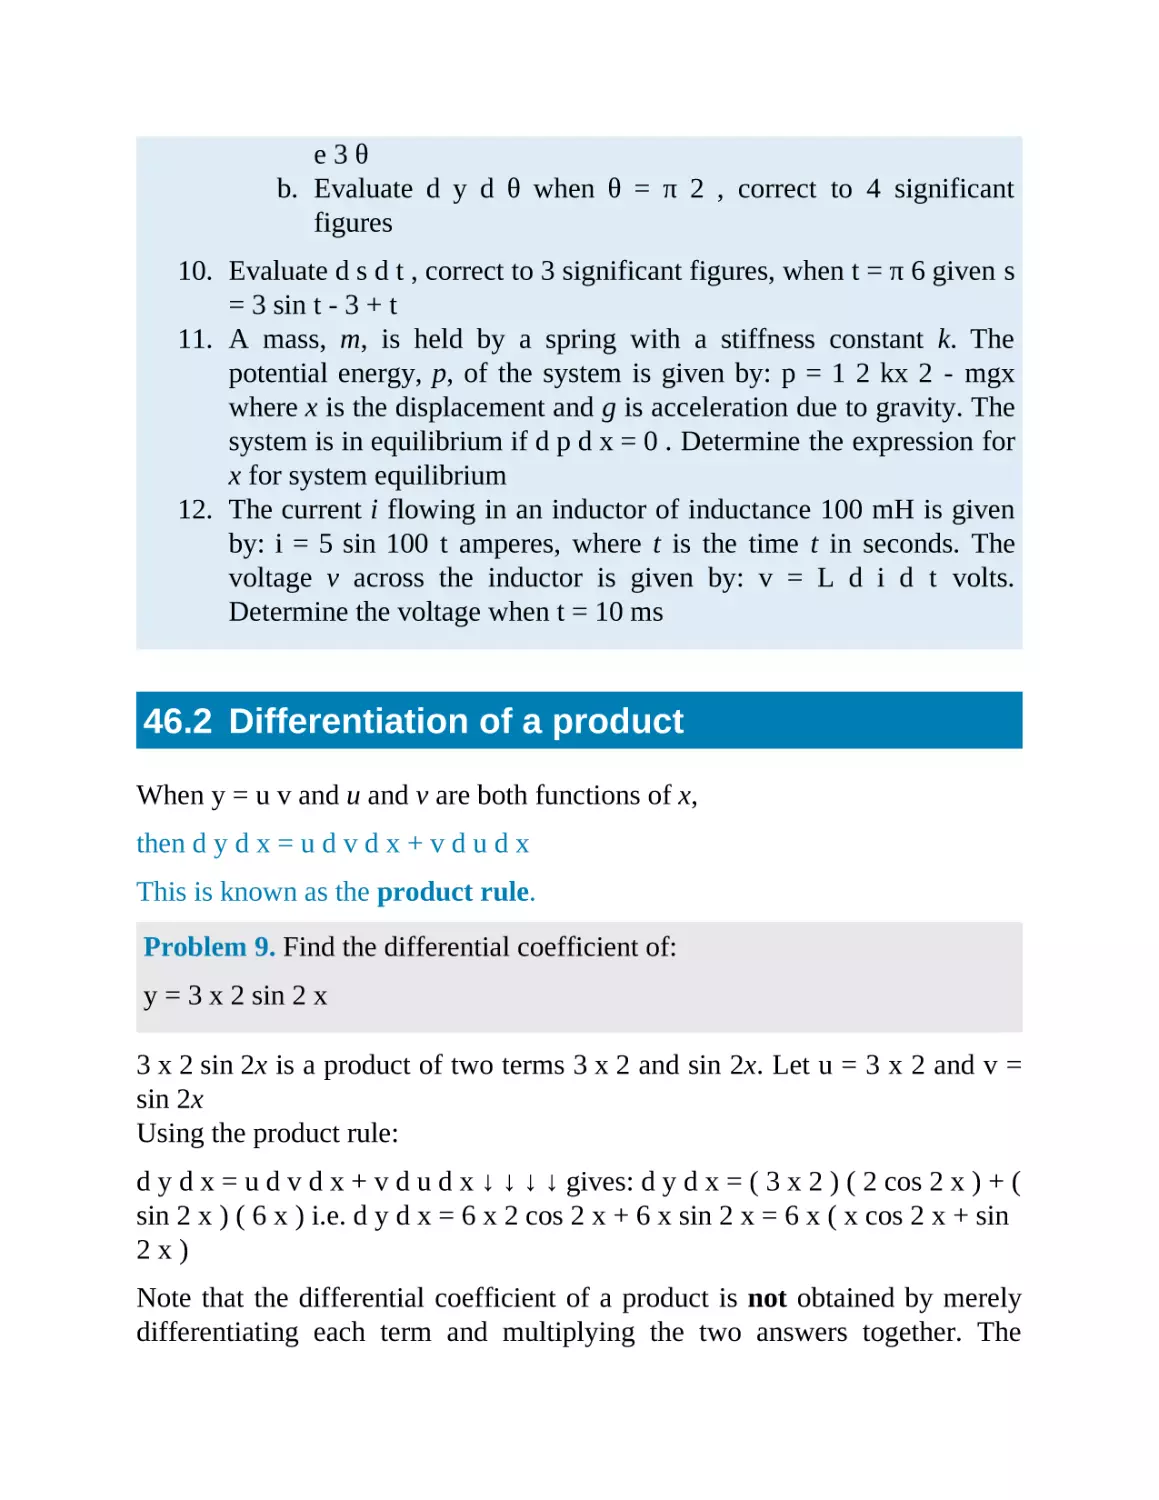 46.2 Differentiation of a product